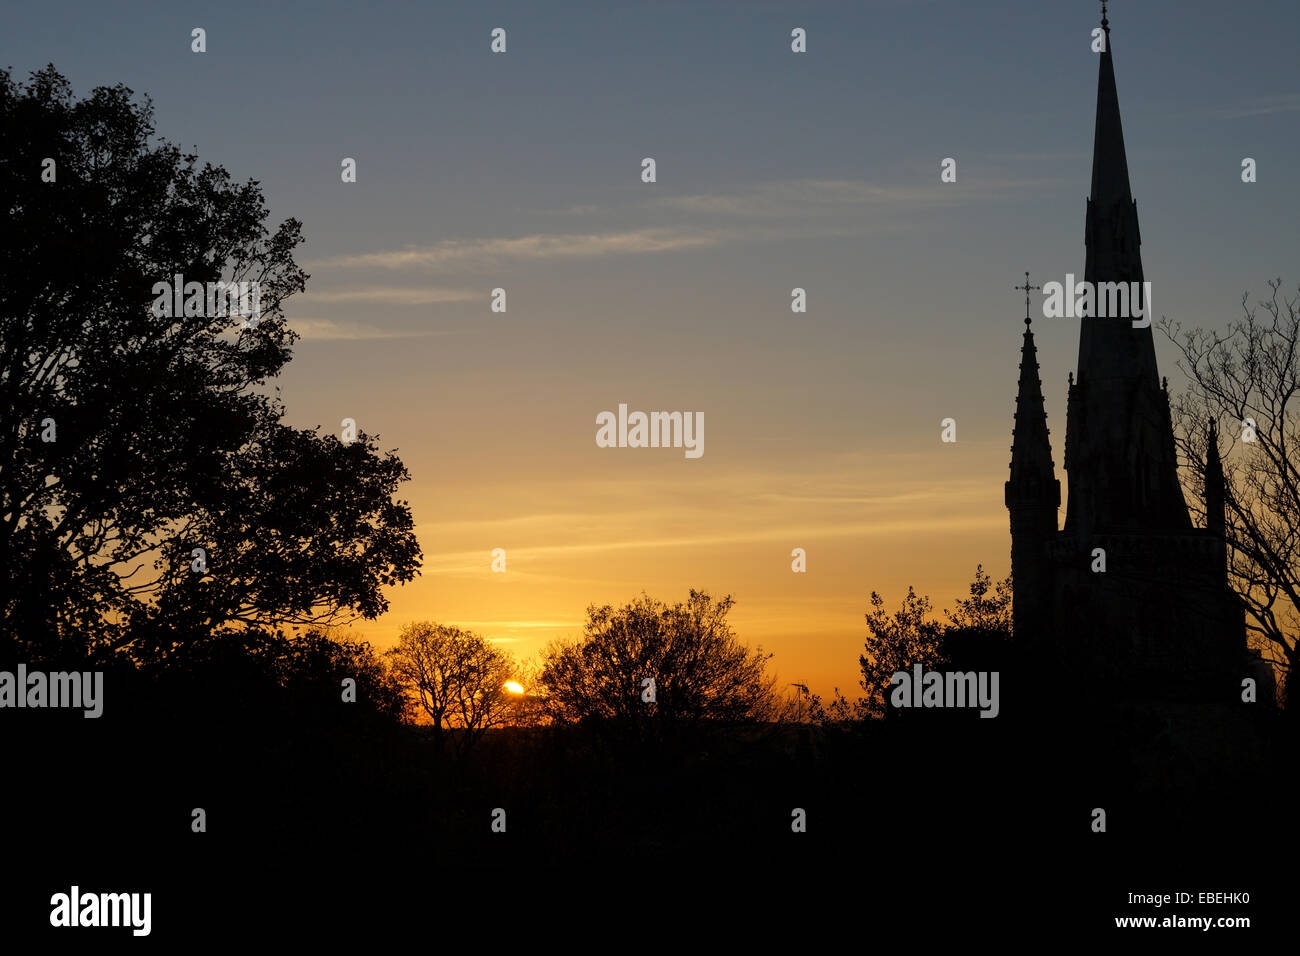 Silhouette of Our Ladye Star of the Sea, Roman Catholic Church near Greenwich Park in London, at a sunset Stock Photo